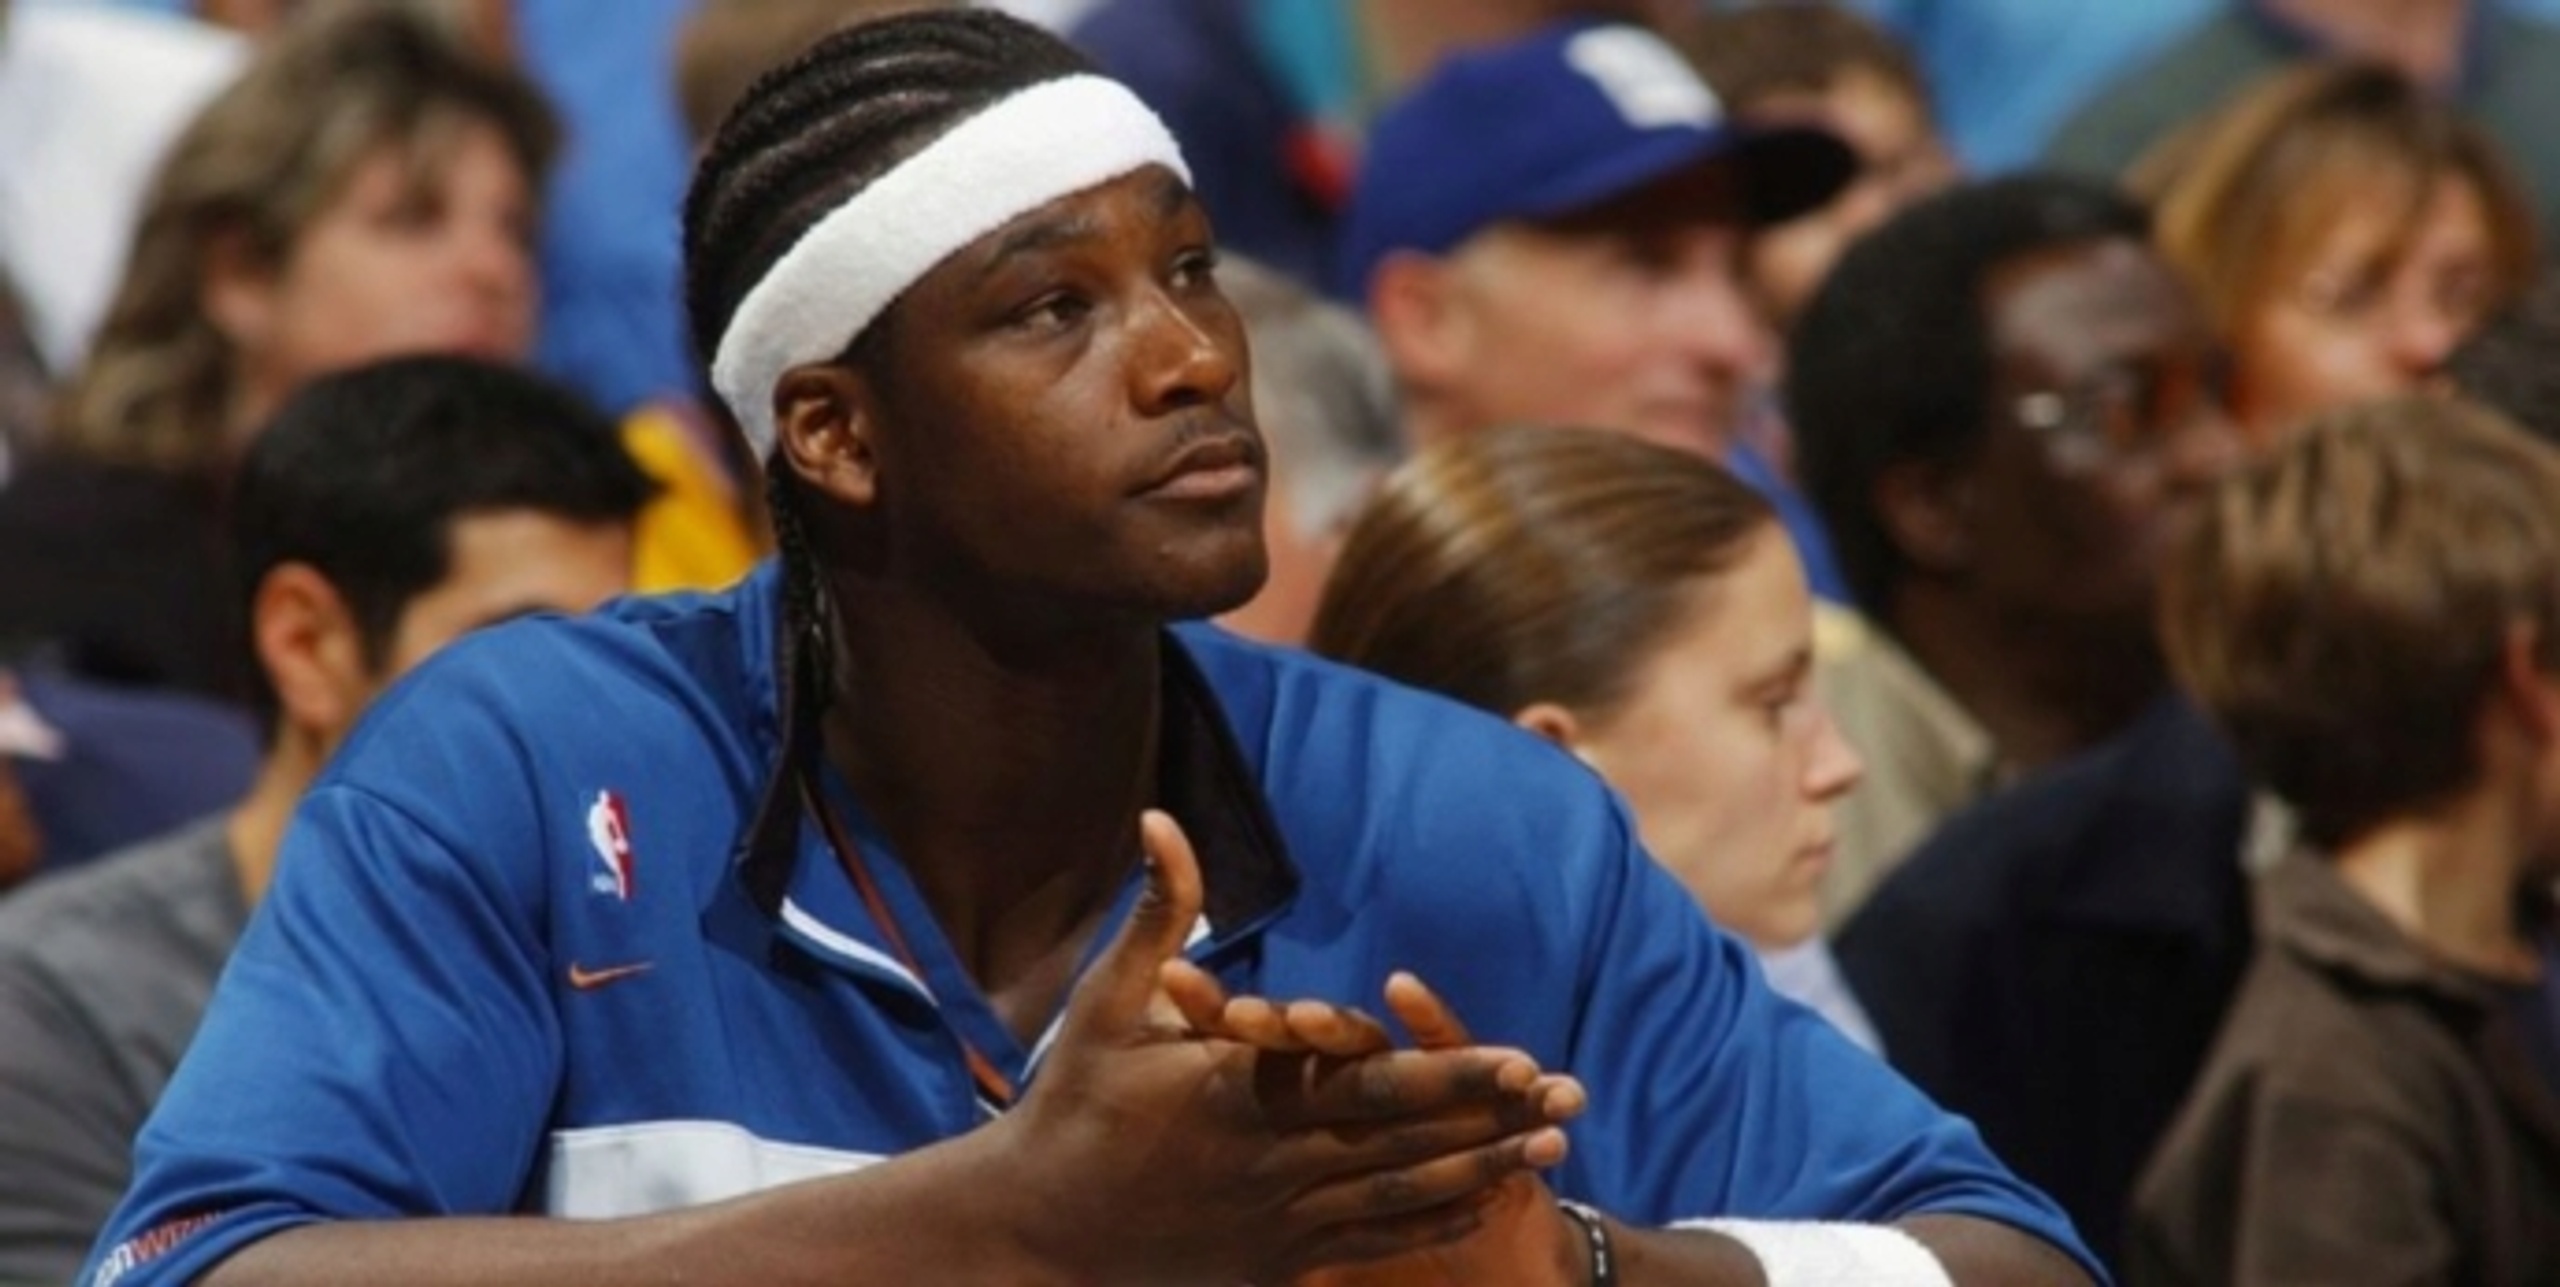 After 20 years of public degradation, Kwame Brown is fed up